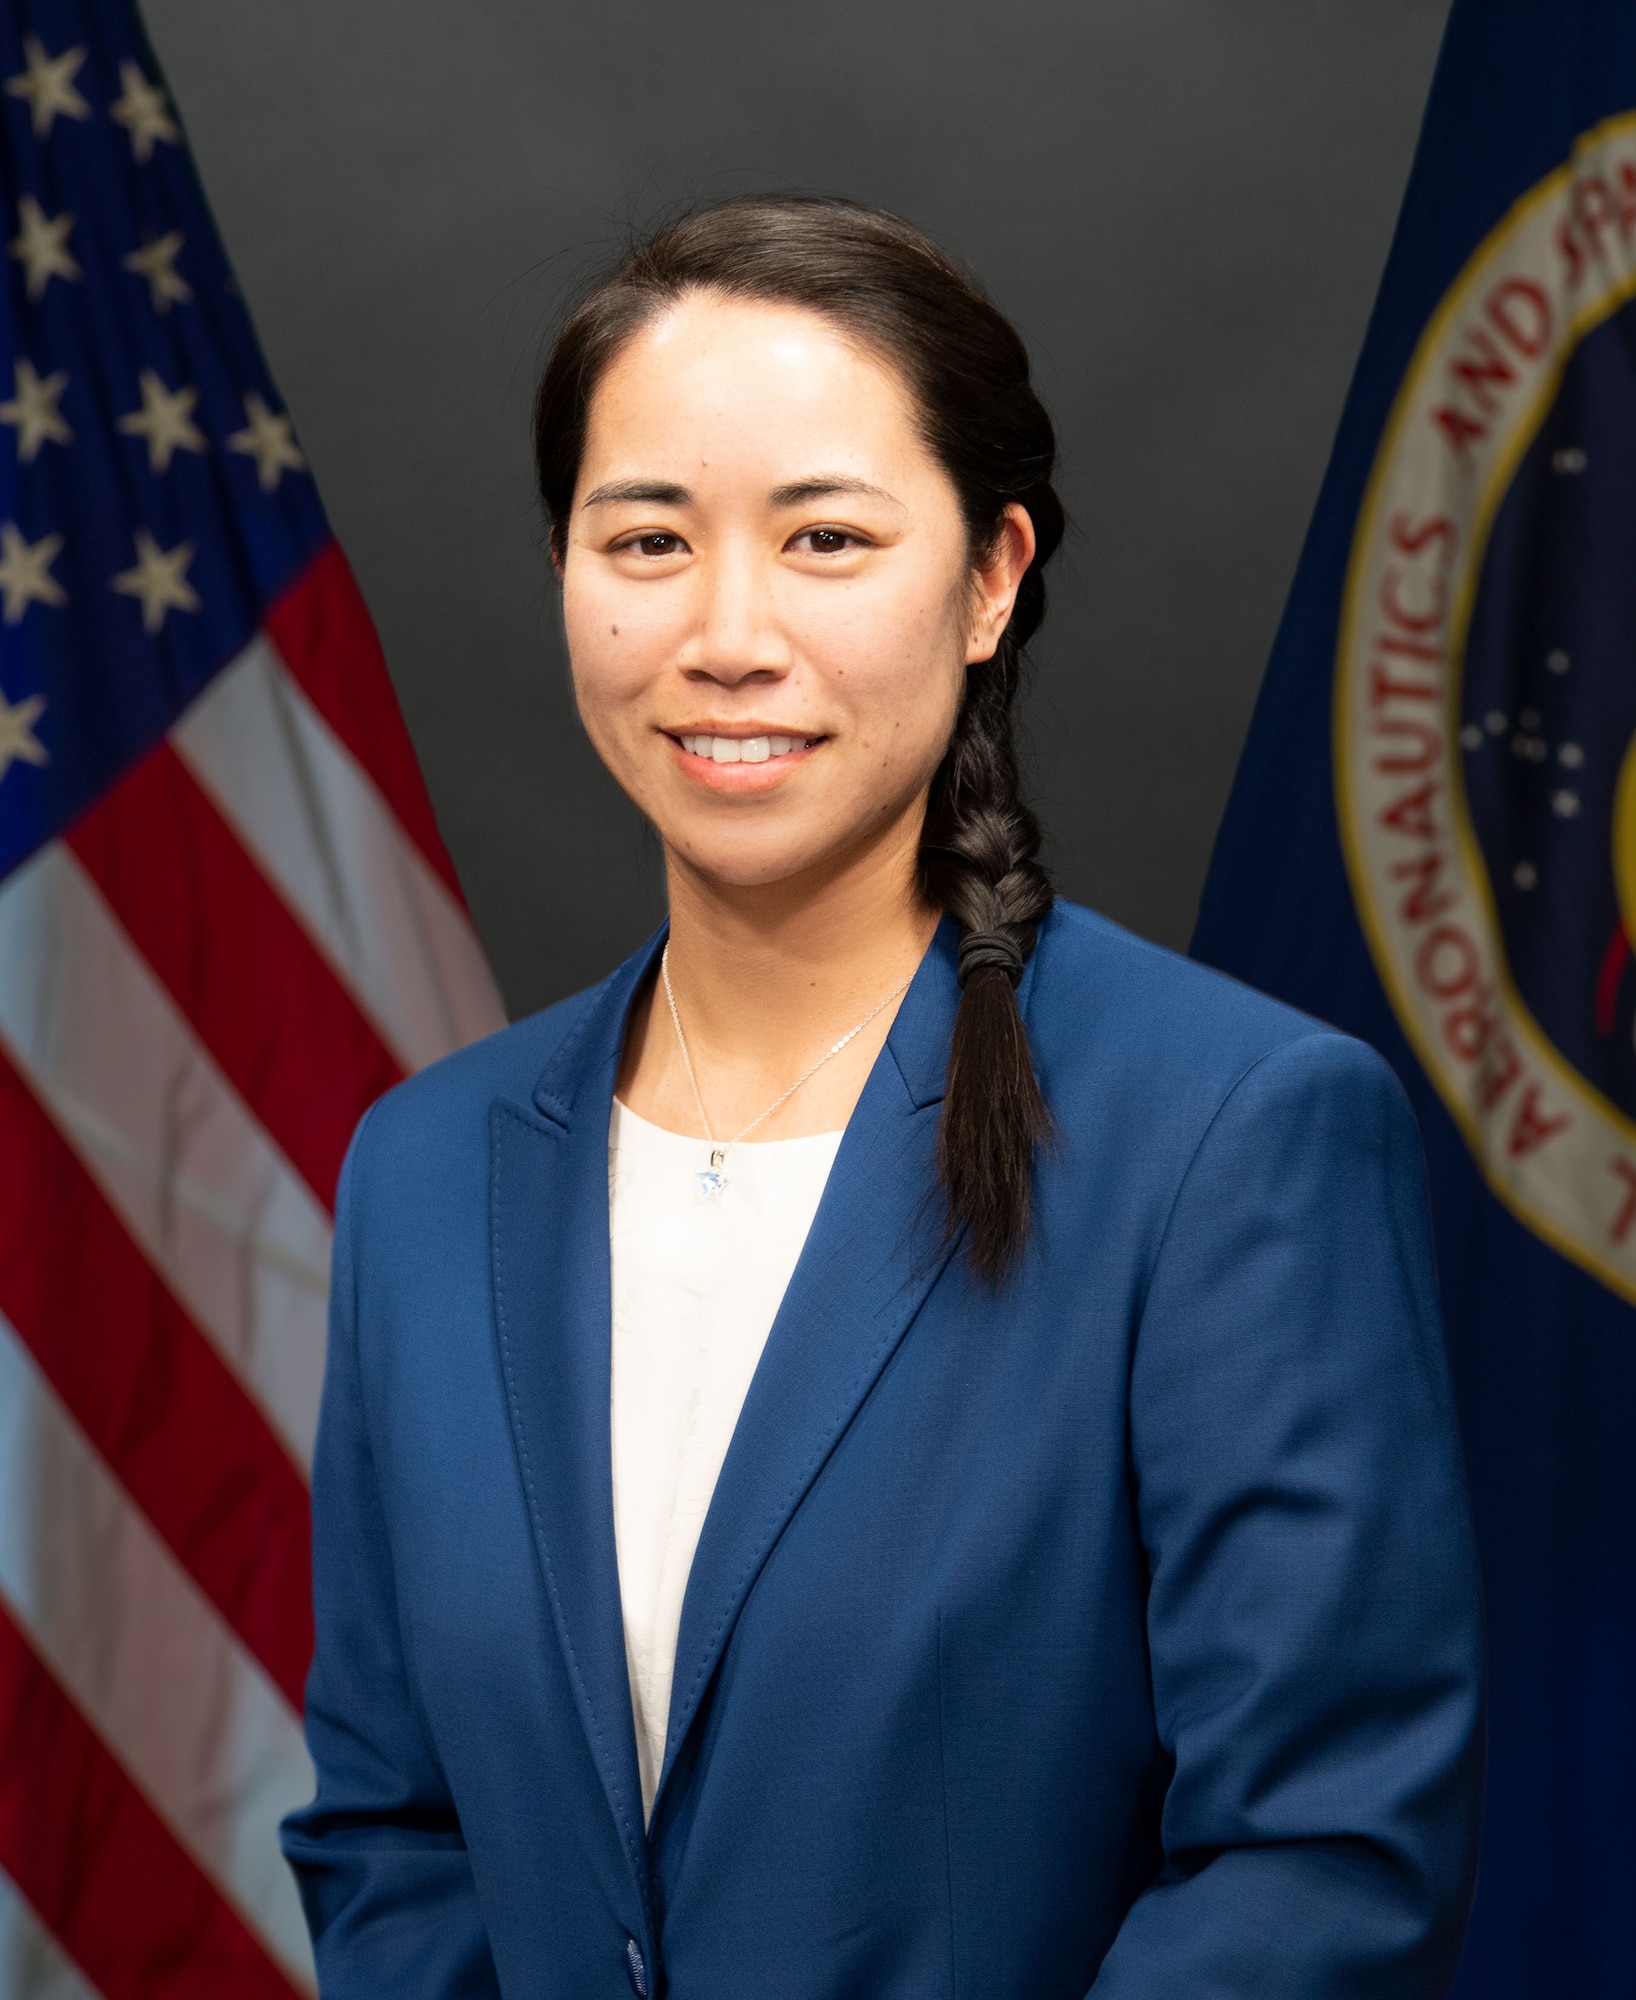 Joyce Hirai poses in the middle of the photo flanked by a US flag and a NASA flag